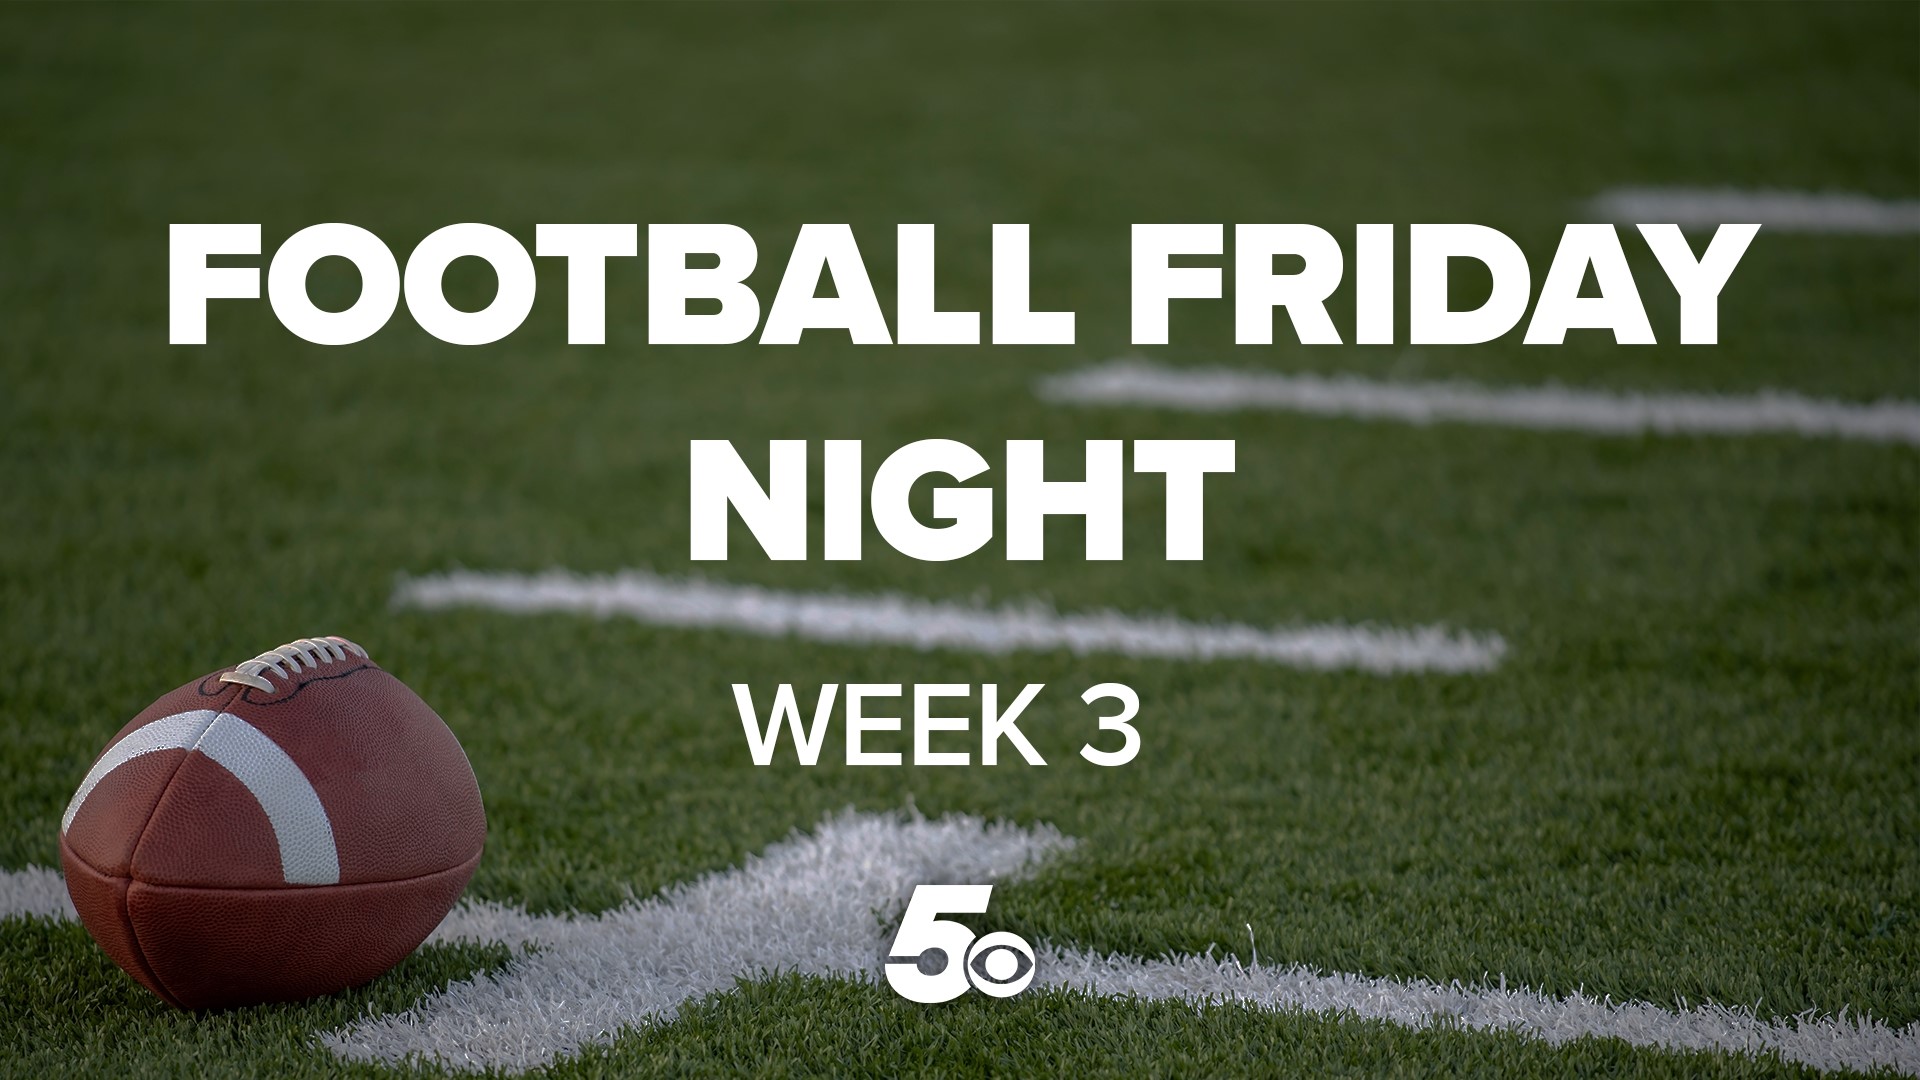 Teams across Arkansas and Oklahoma competed against each other during Week 3 of Football Friday Night on Sept. 16.